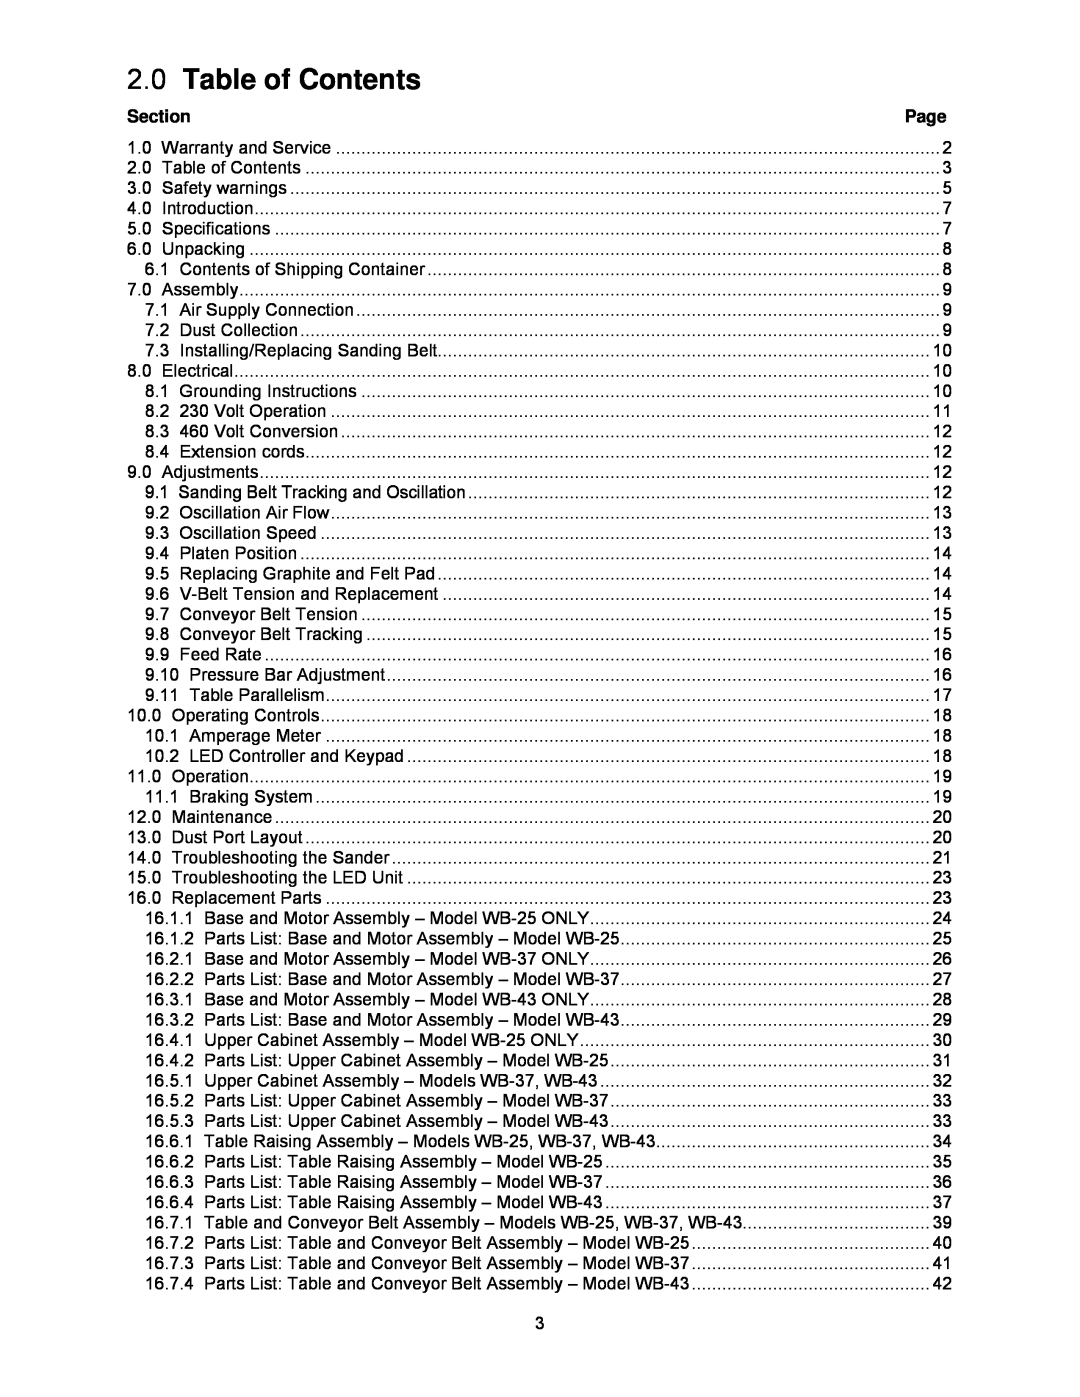 Powermatic WB-37, WB-25, WB-43 operating instructions Table of Contents, Section 